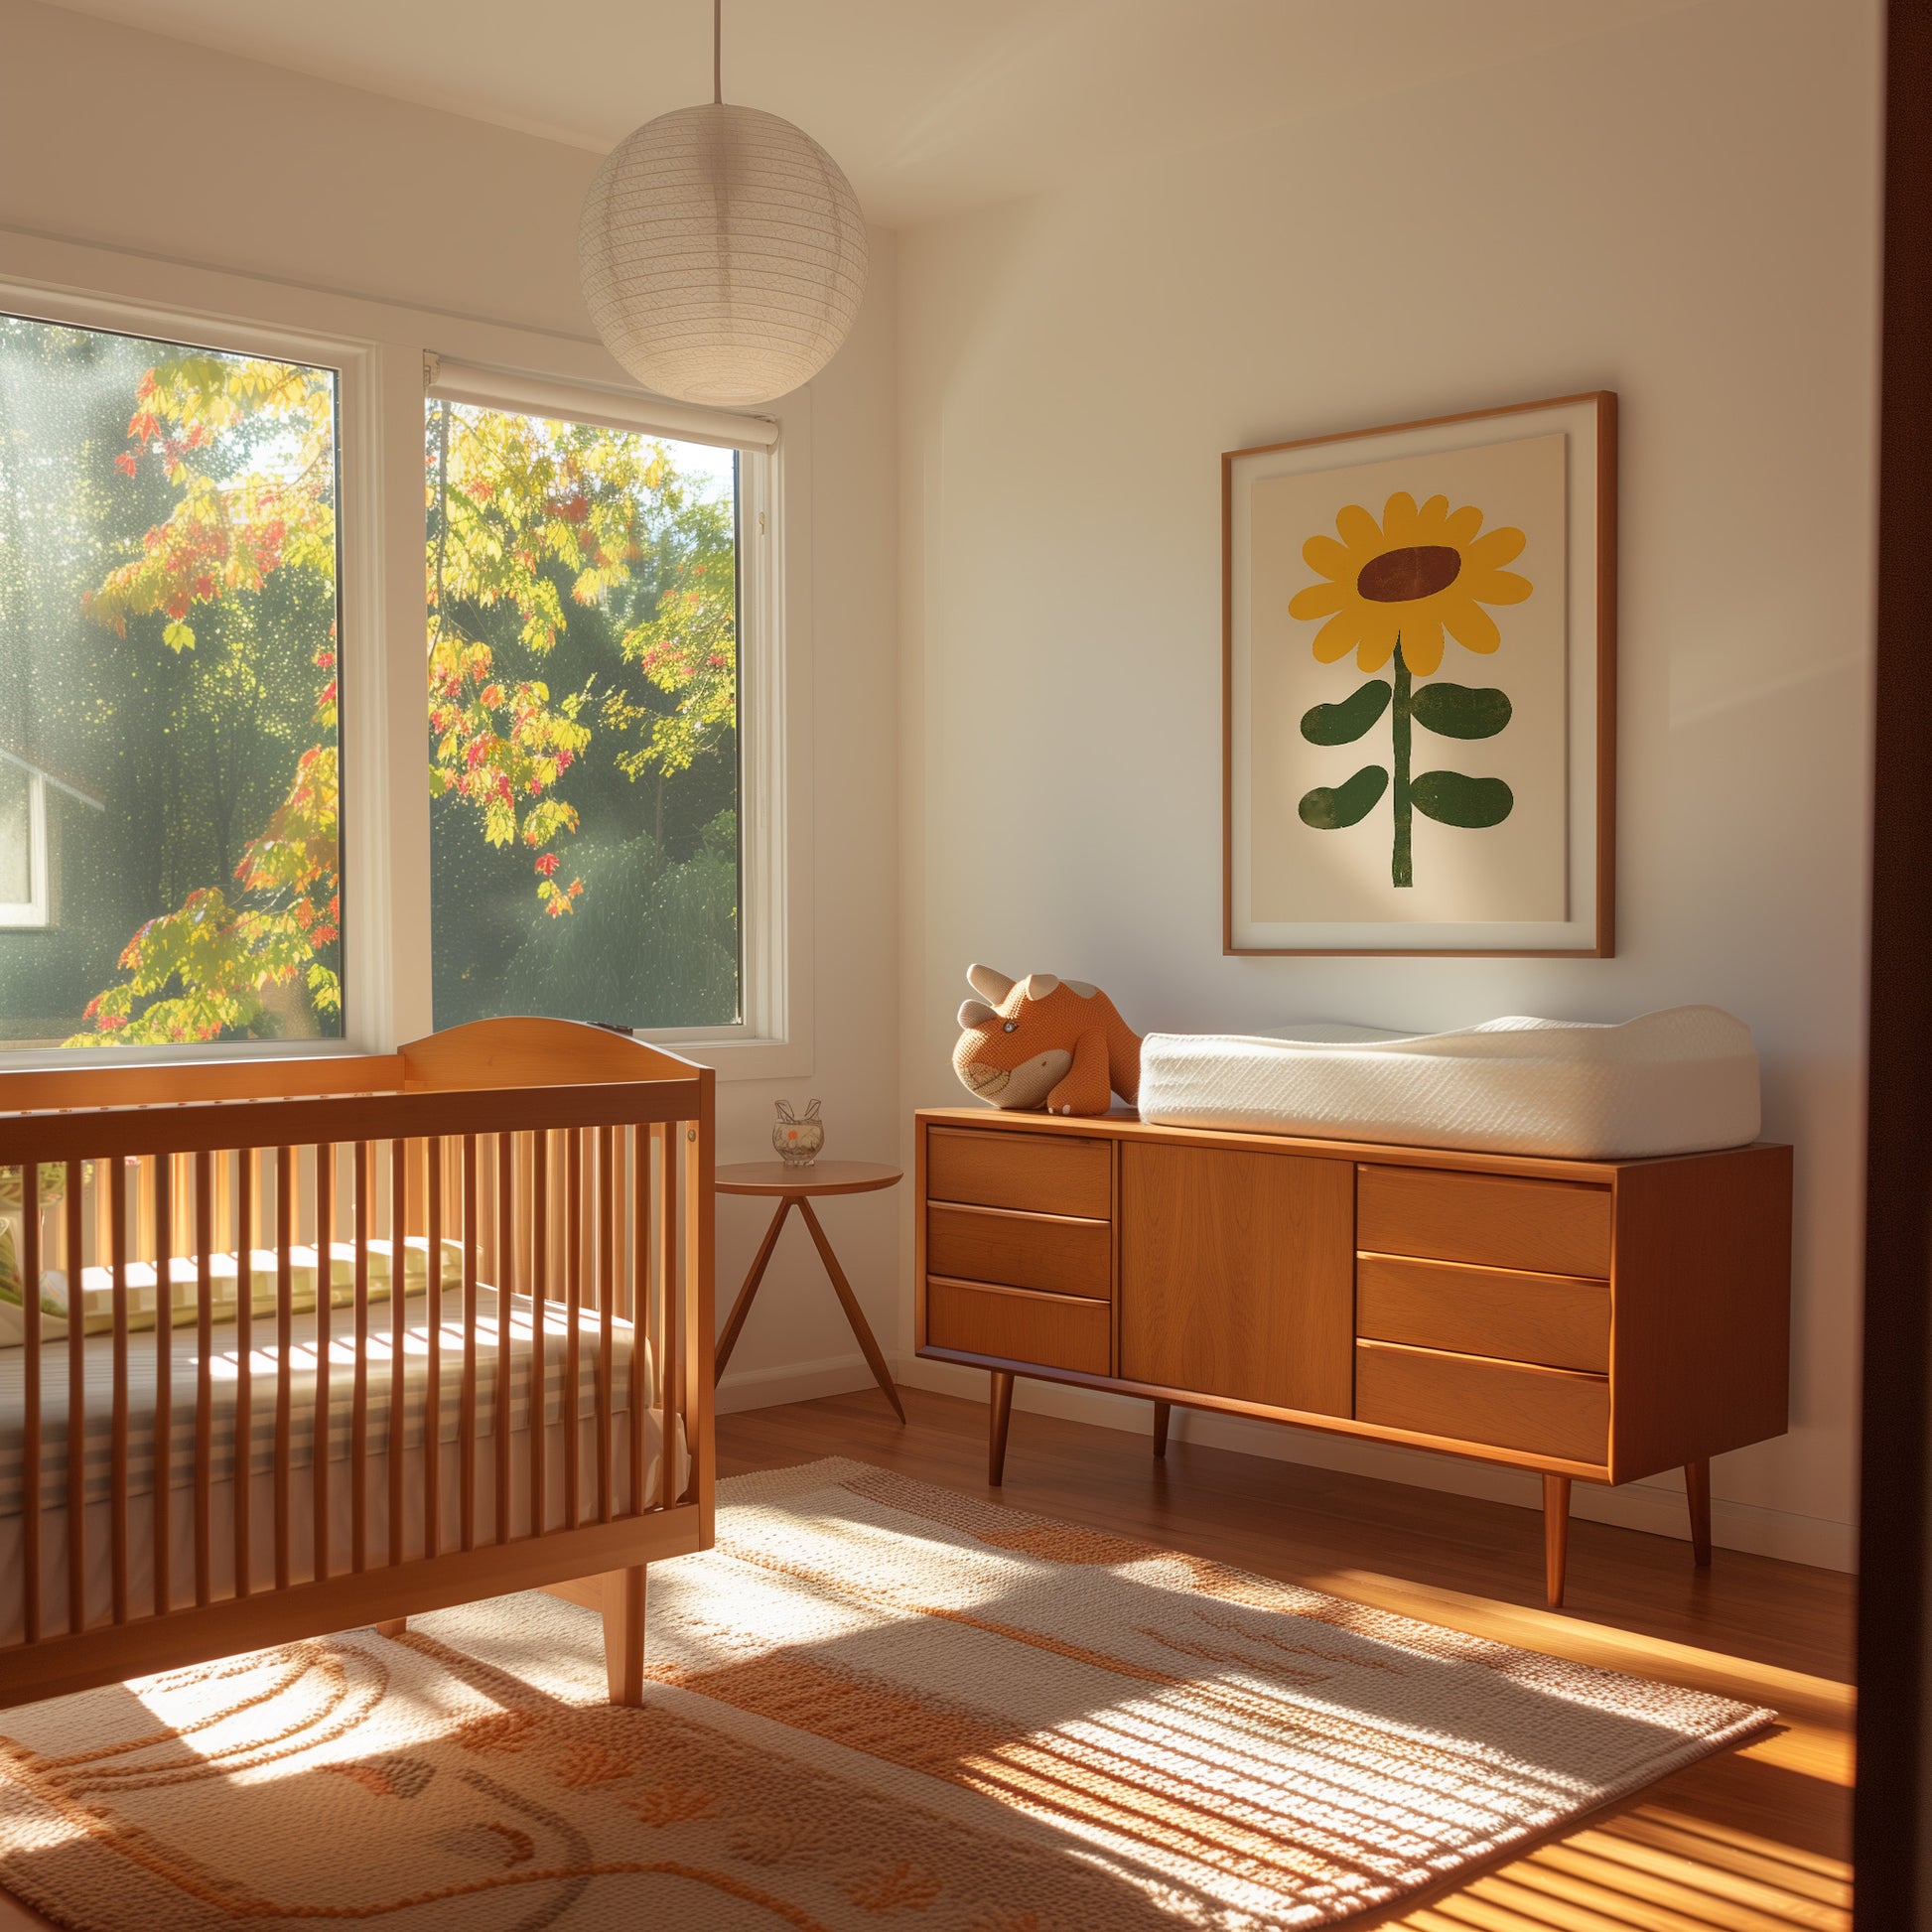 A sunny nursery room with a crib, changing table, and autumn trees visible outside the window.